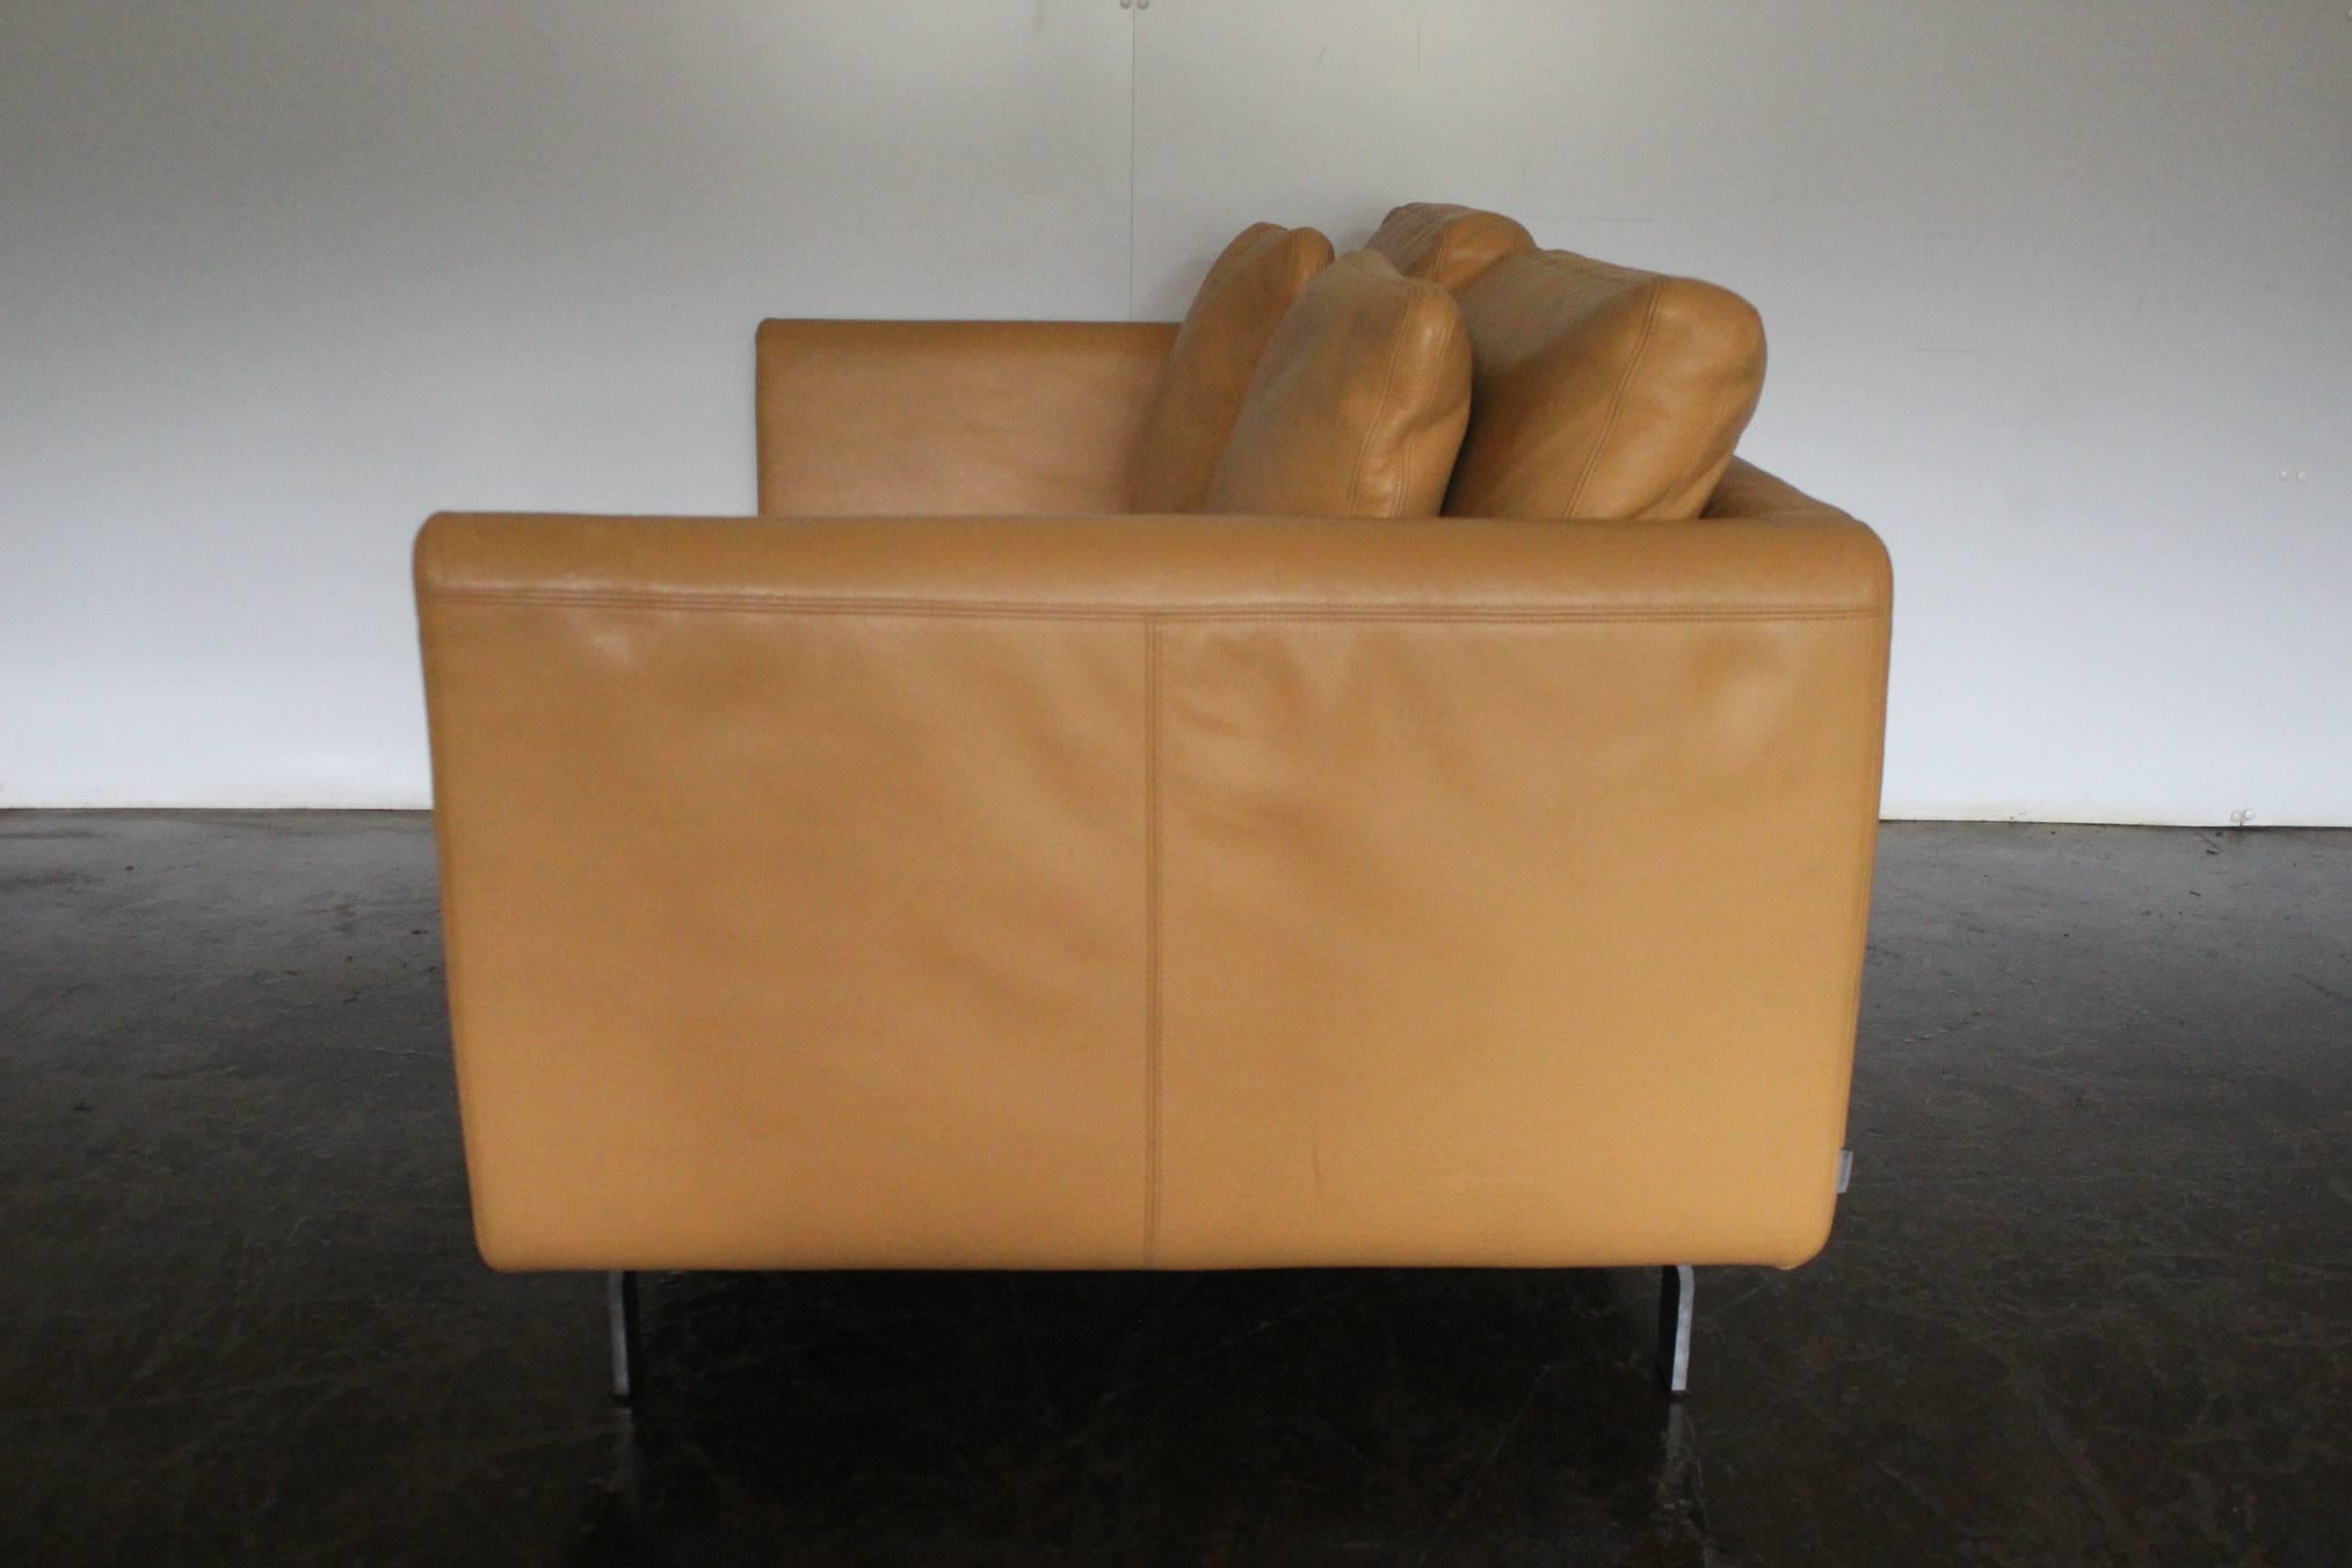 Metalwork Pair of Walter Knoll Two-Seat Sofas in Pristine Pale-Tan Leather